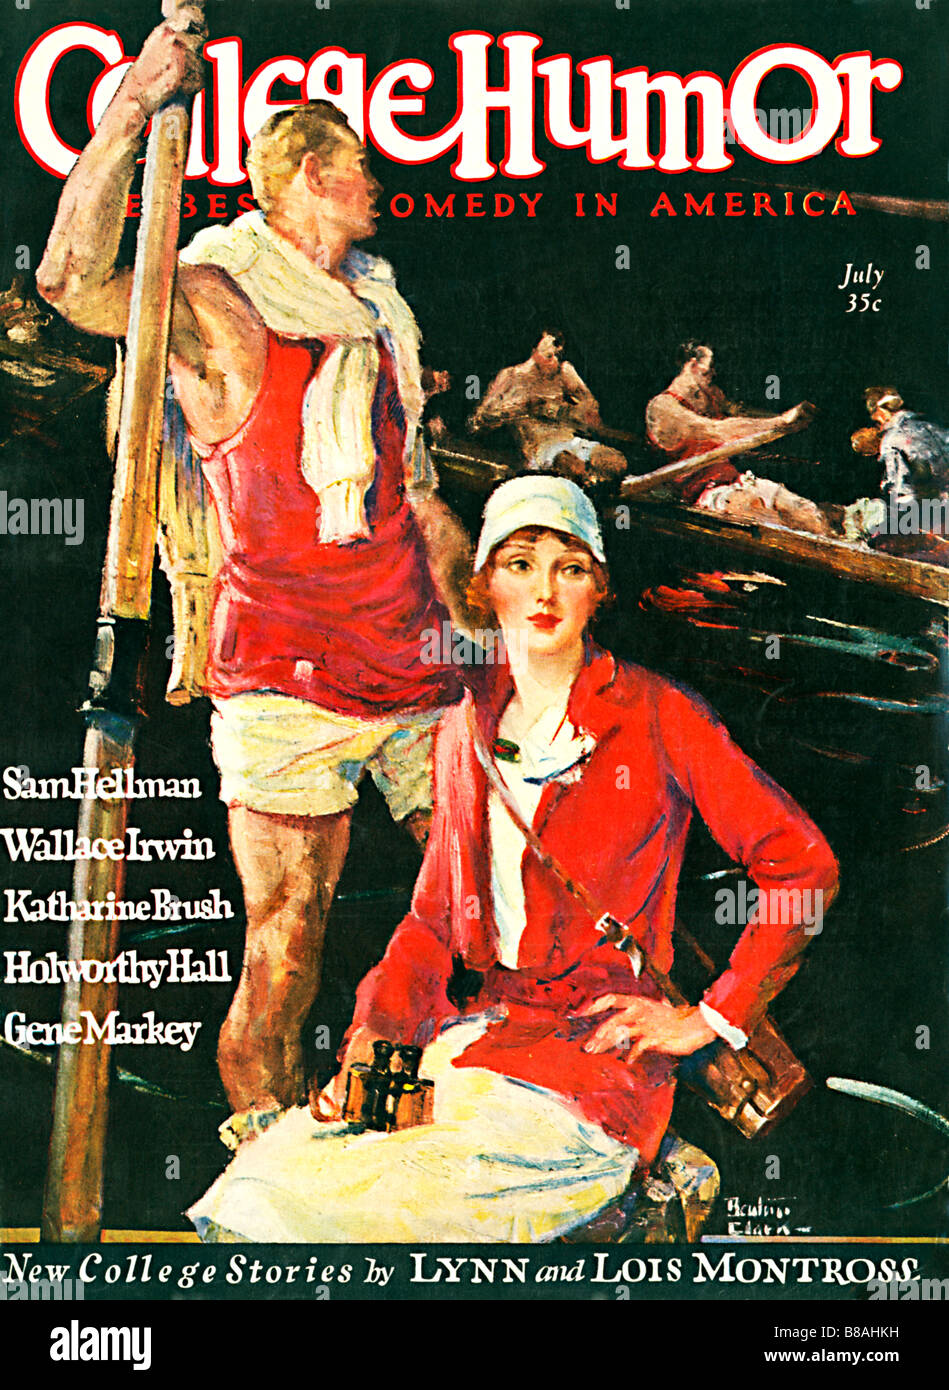 College Humour Rowing 1928 cover of the American humourous magazine with a rowing theme Stock Photo